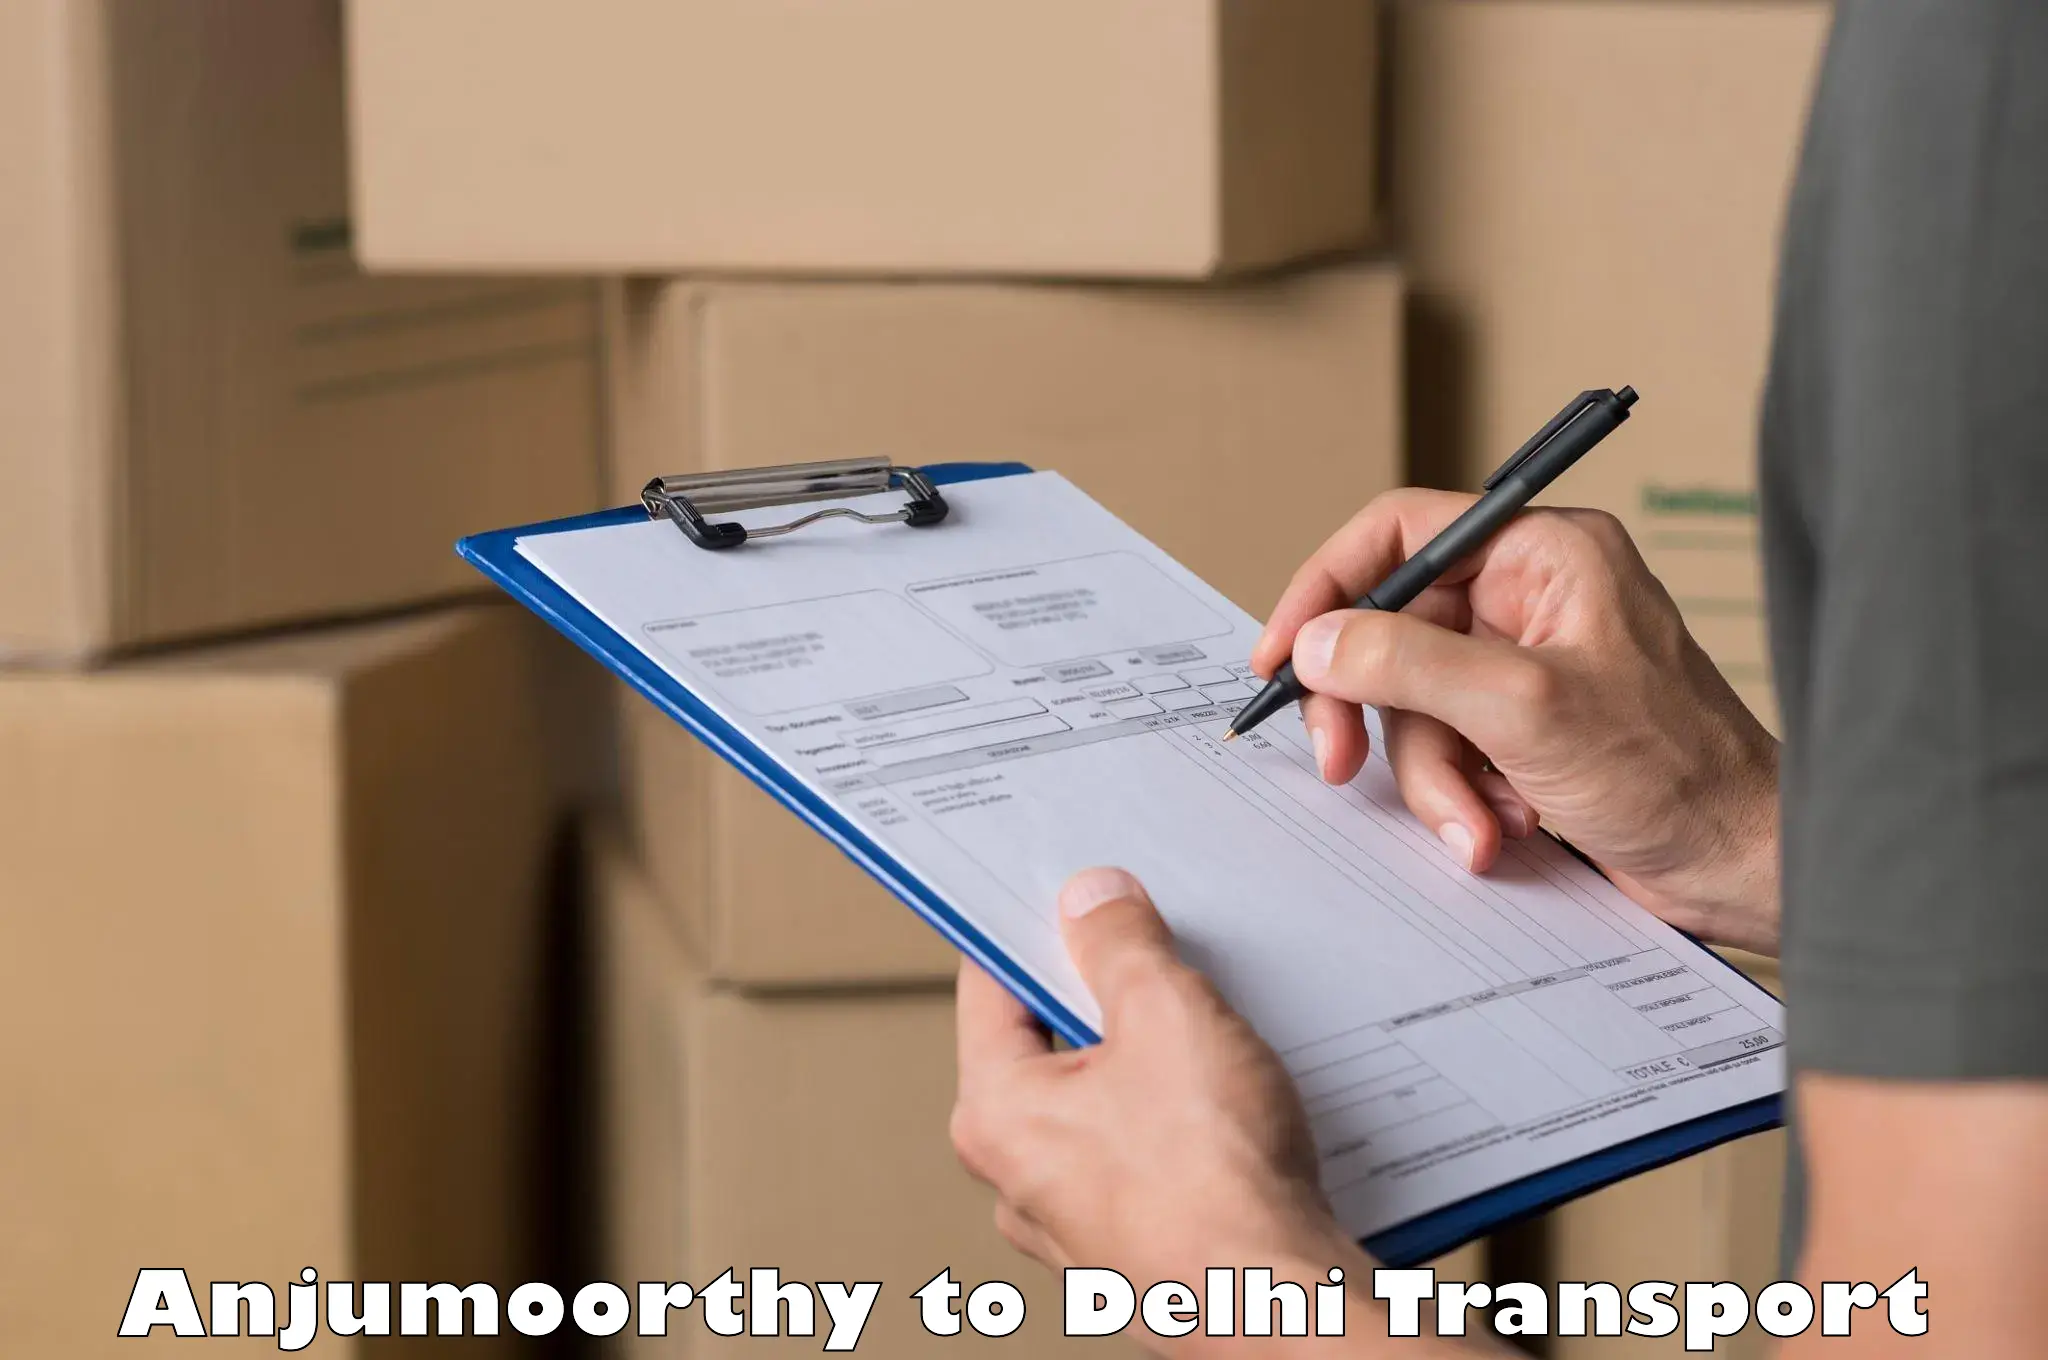 Parcel transport services Anjumoorthy to Lodhi Road